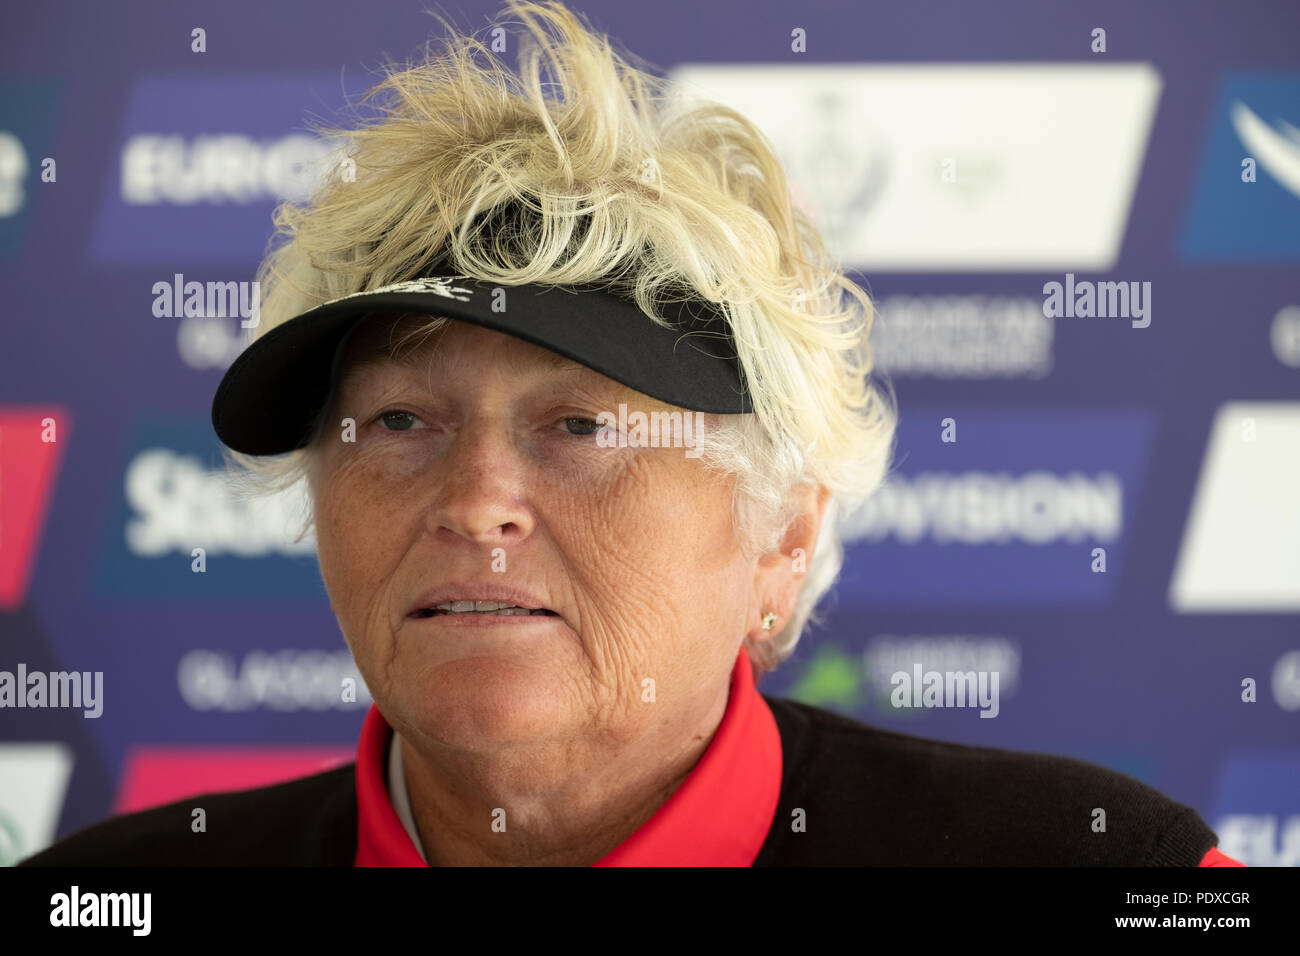 Gleneagles, Scotland, UK; 10 August, 2018.  Day three of European Championships 2018 competition at Gleneagles. Men's and Women's Team Championships Round Robin Group Stage. Four Ball Match Play format.  Pictured; Great Britain's Dame Laura Davies in post match press meeting. GB beat Belgium 4 and 2. Credit: Iain Masterton/Alamy Live News Stock Photo